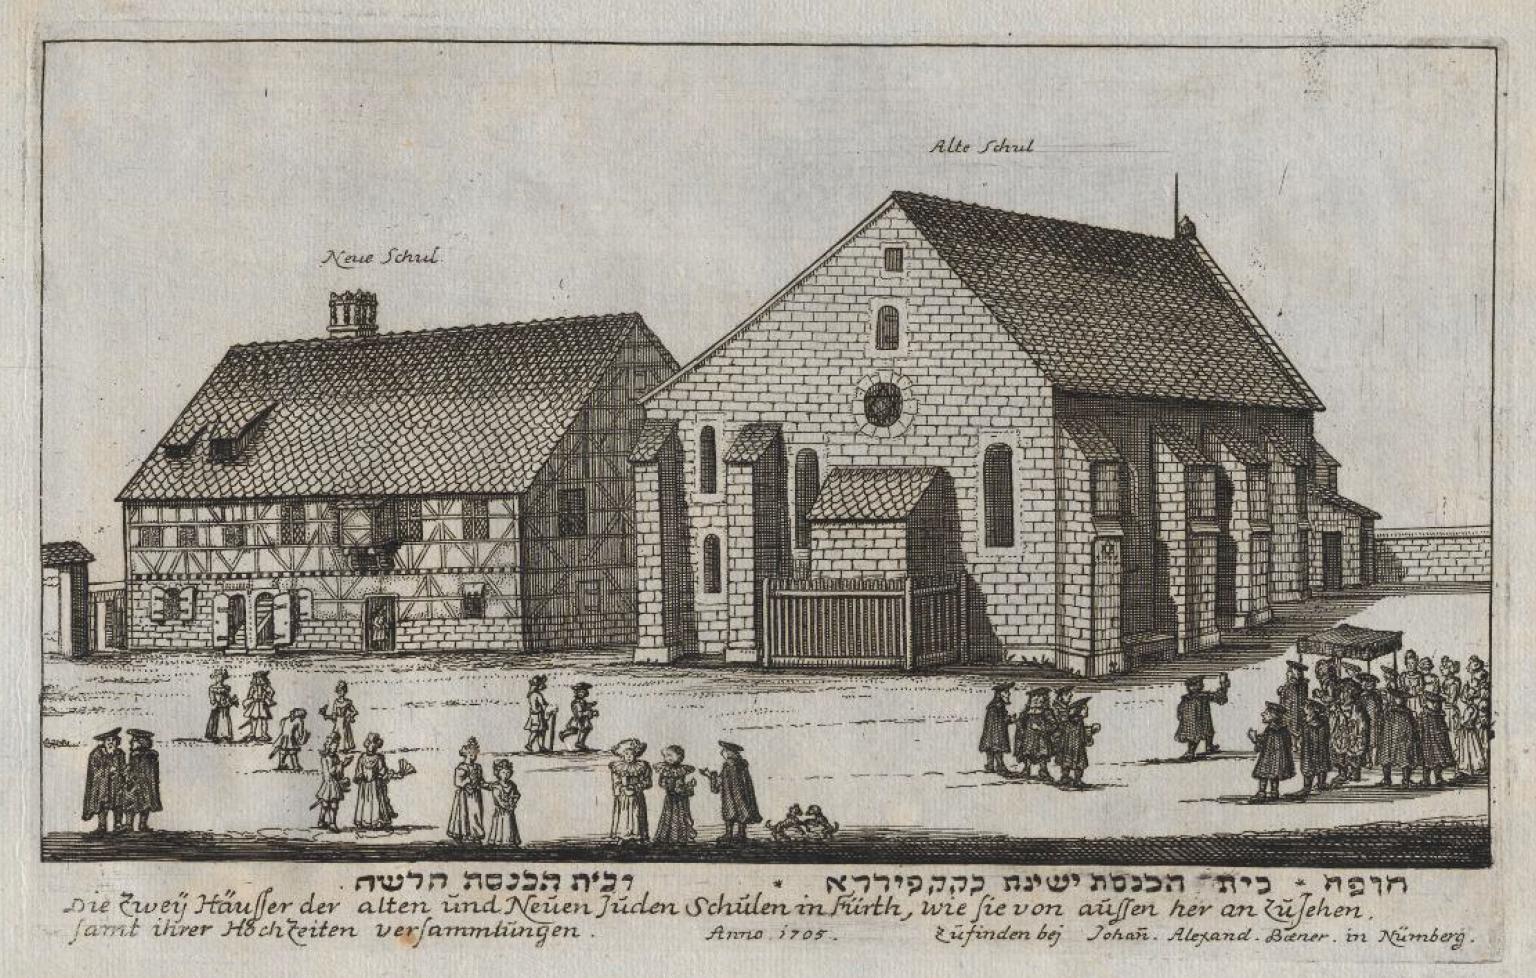 Print engraving of two buildings with tile roofs next to each other, one of mostly wood and the other of stone, with several people standing in front of them, and German writing below. 